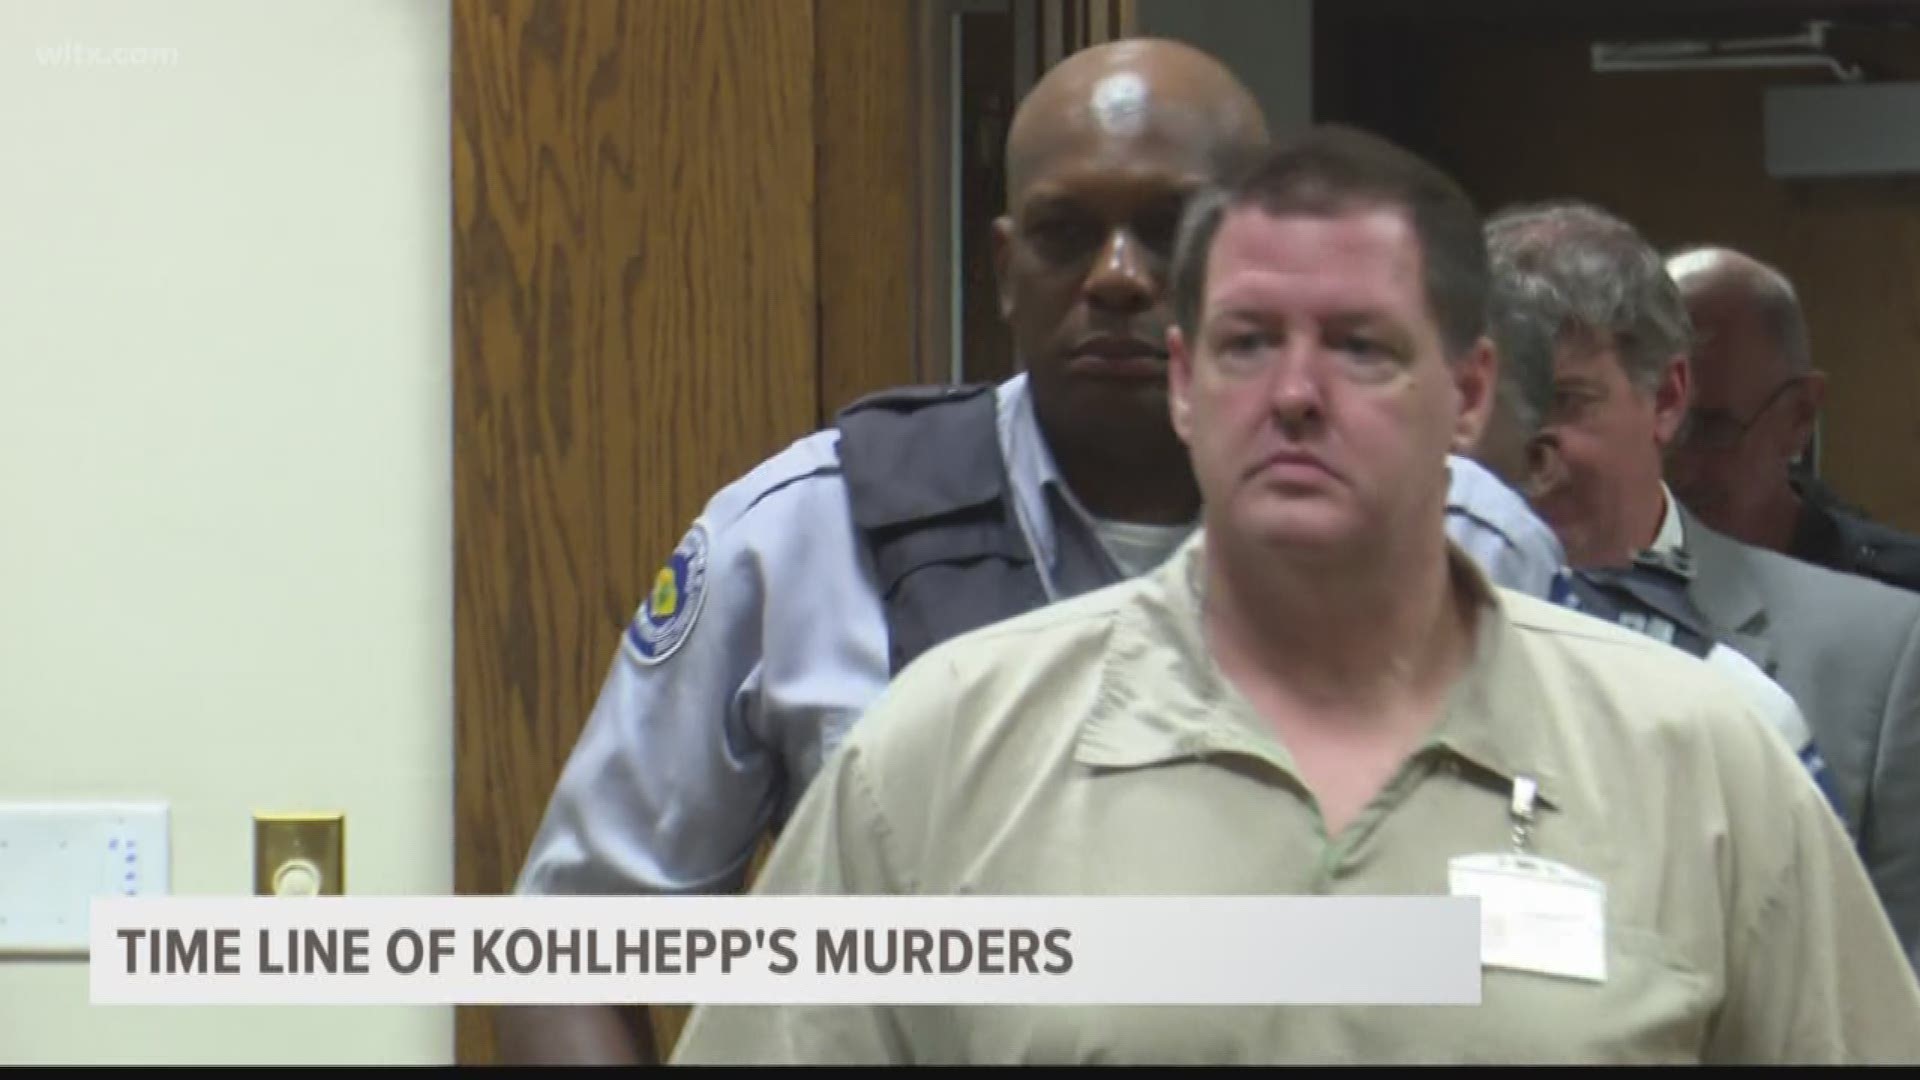 Todd Kohlehepp the serial killer has told authorities about two more victims in the Upstate 